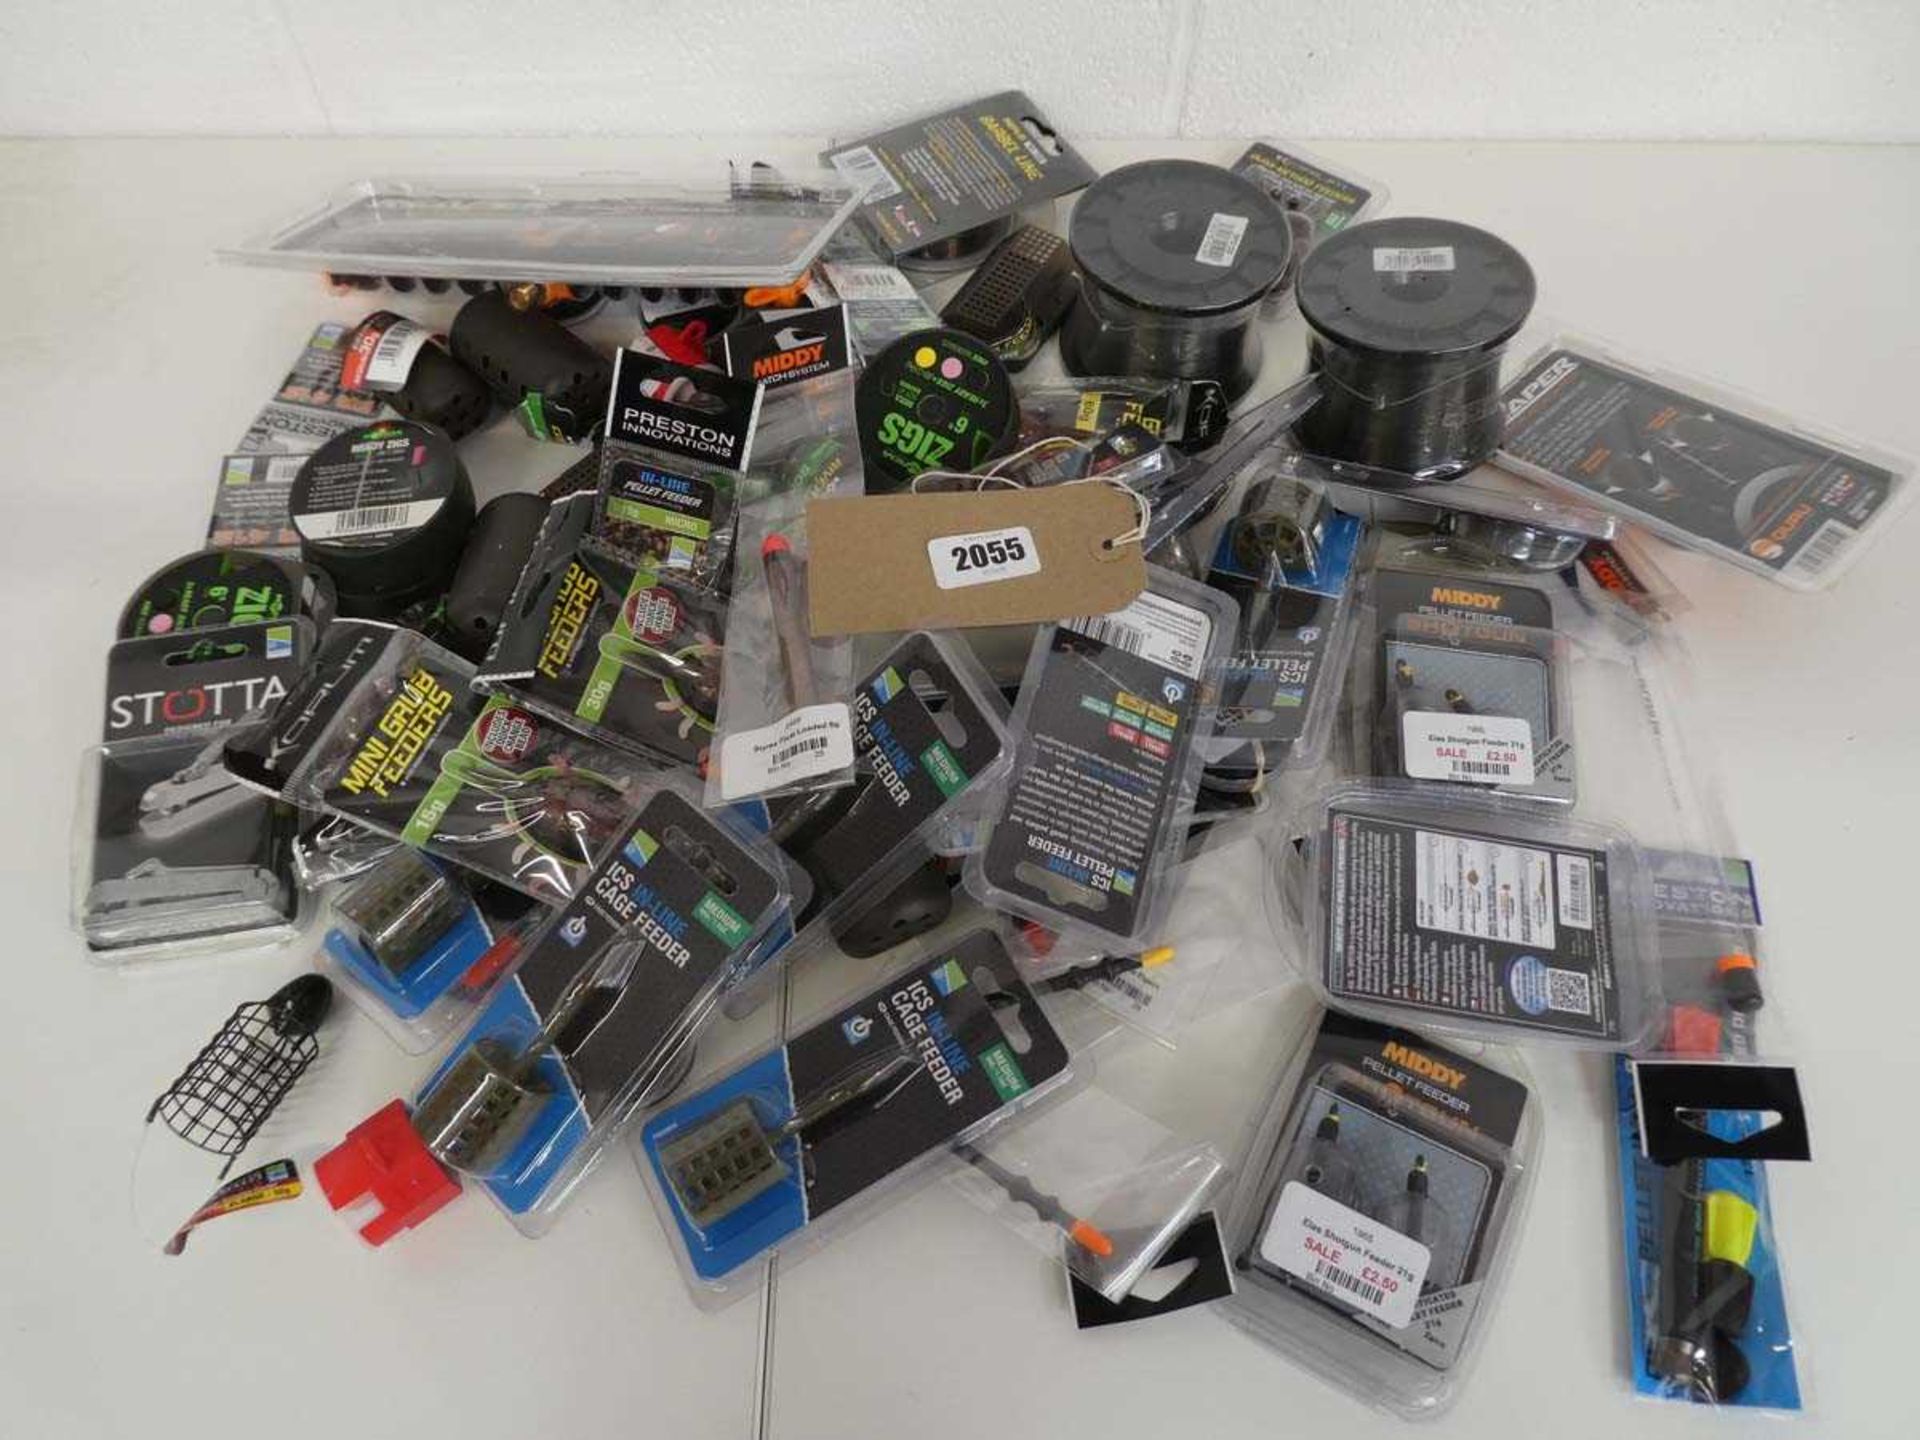 Quantity of fishing accessories incl. swing feeders, floats, shot weights, etc.